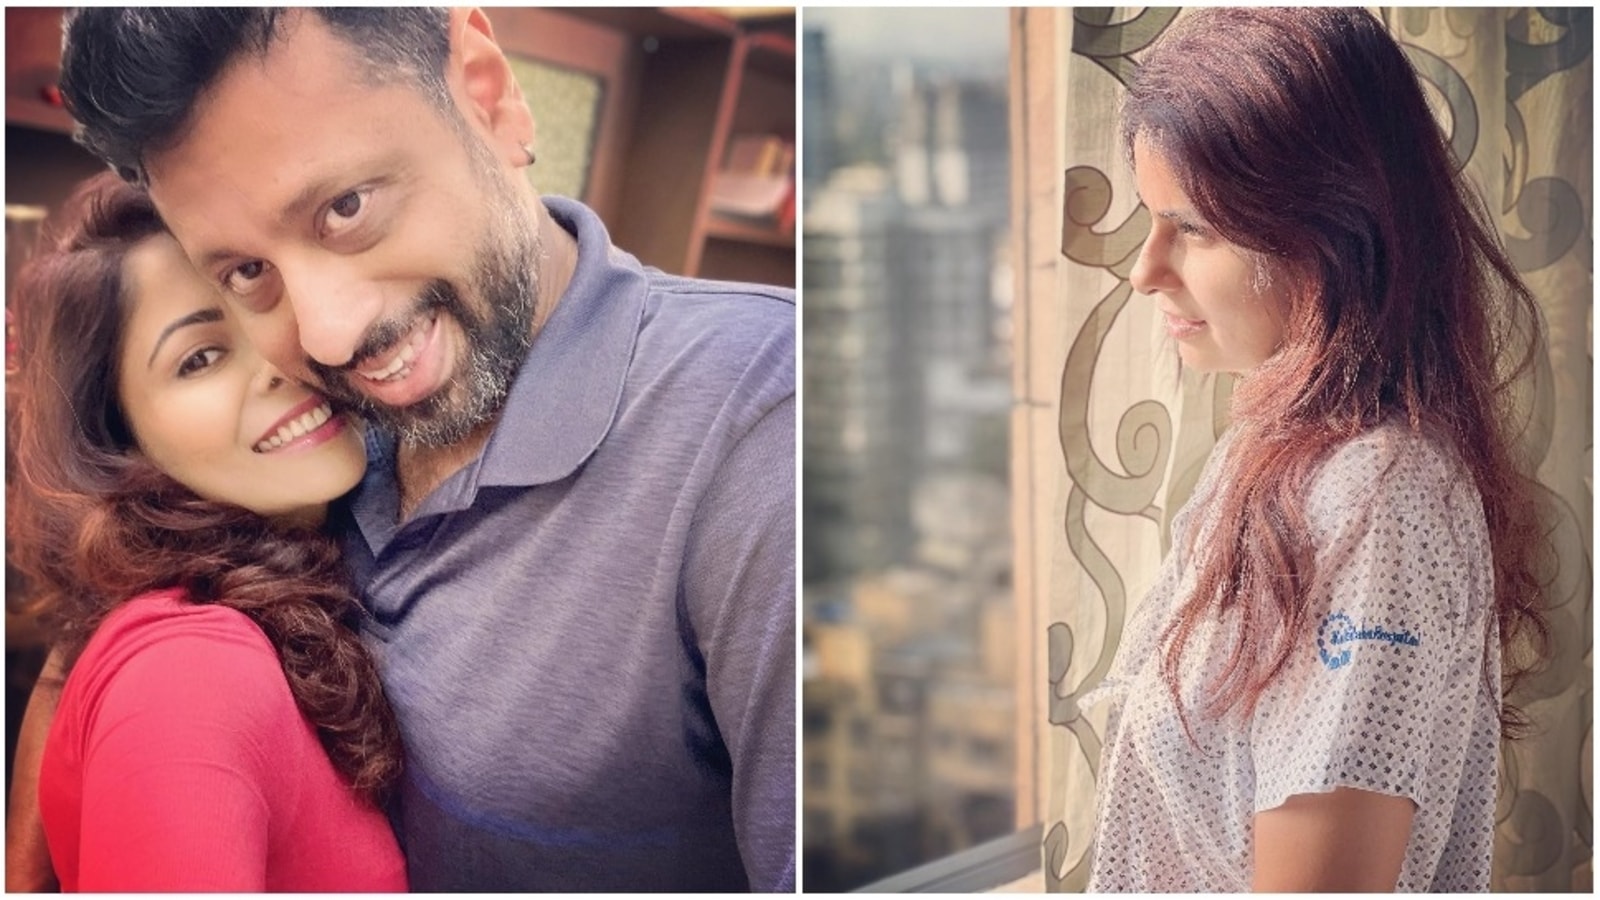 Chhavi Mittal pens appreciation post for husband Mohit Hussein post breast cancer surgery: ‘What would I do without you’